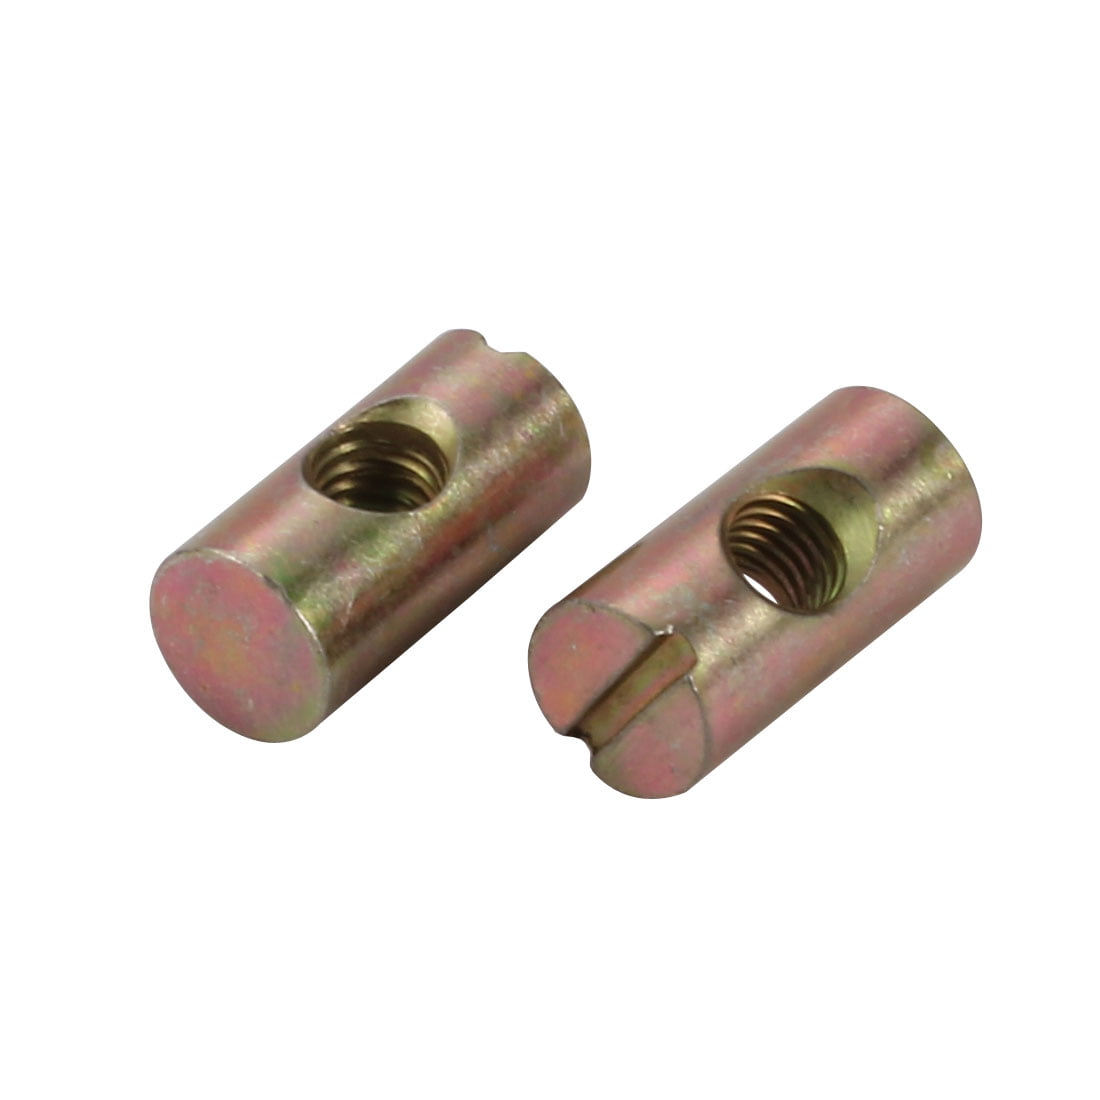 10pcs M6 Thread 20mm Height Zinc Plated Iron Slotted Drive Cross Dowel Nuts 